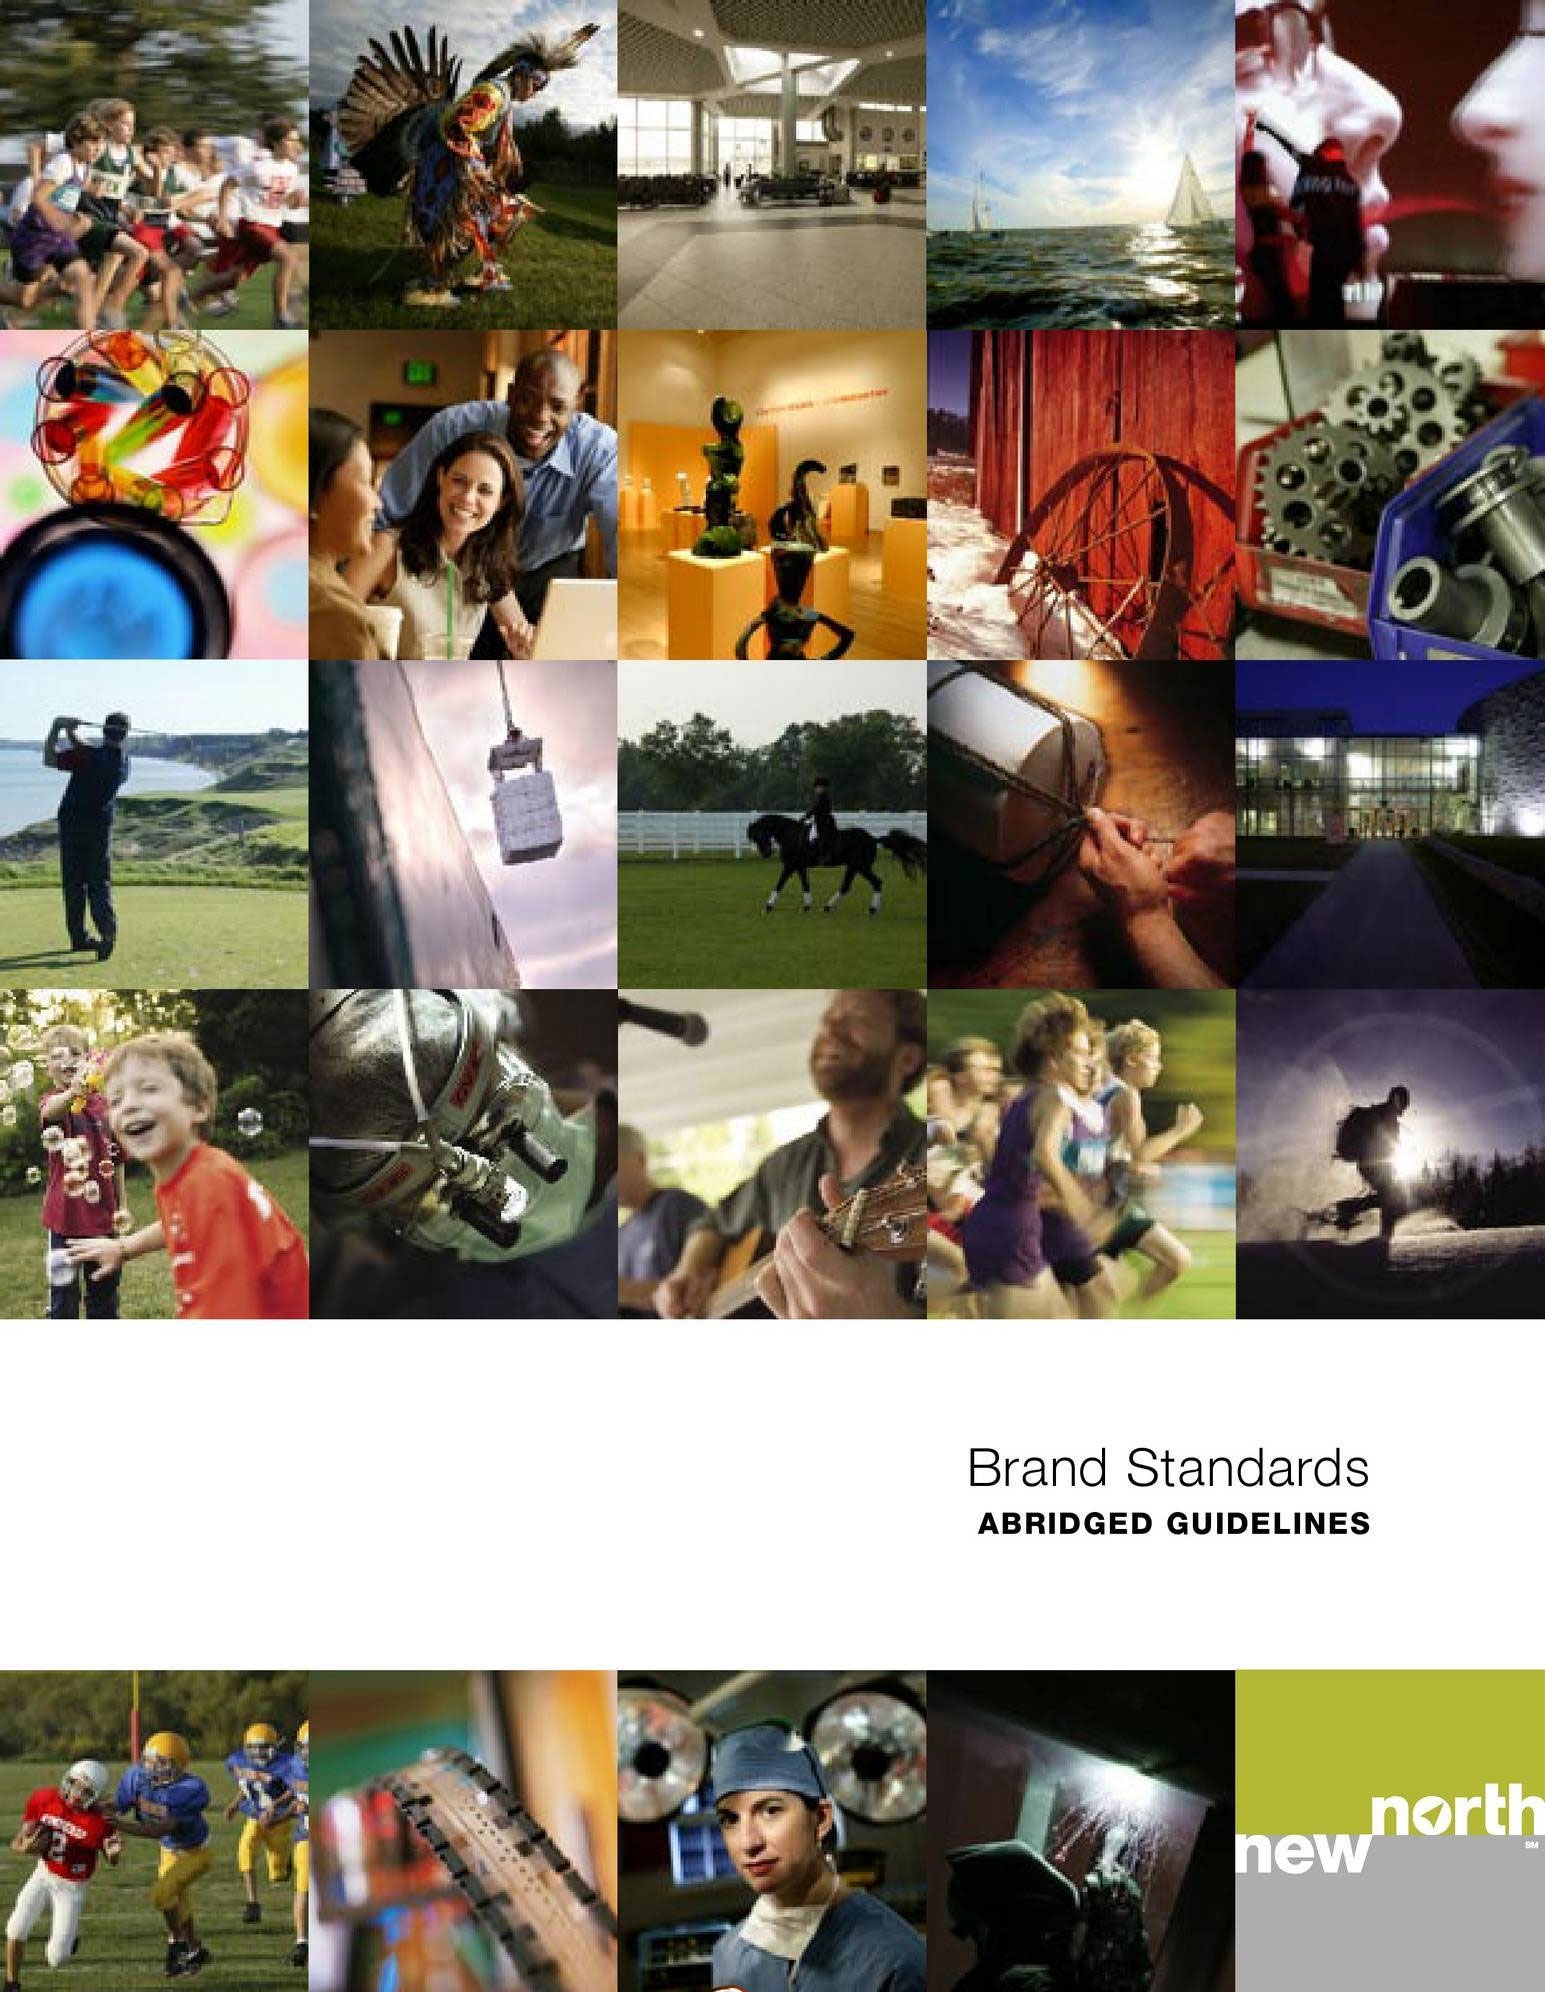 new north brand standards abridged guidelines